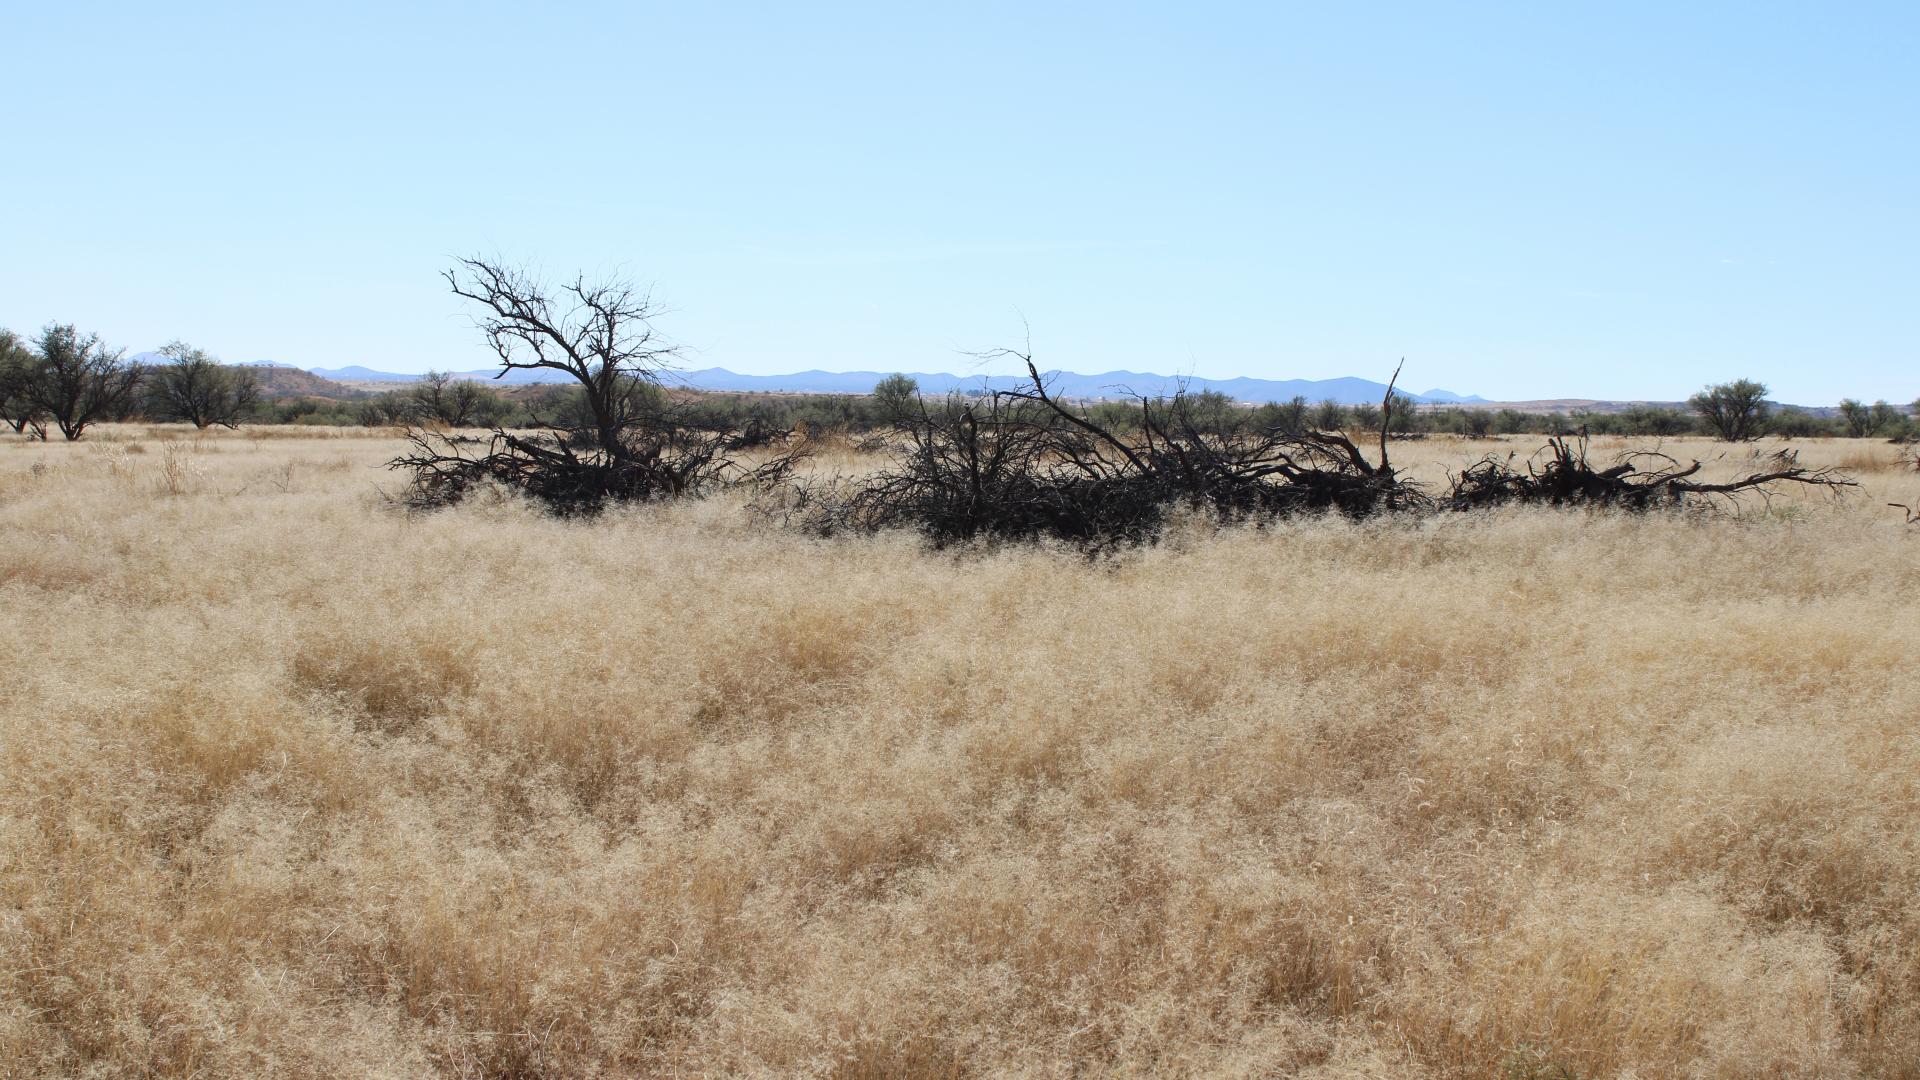 list and explain two methods of managing rangelands sustainably